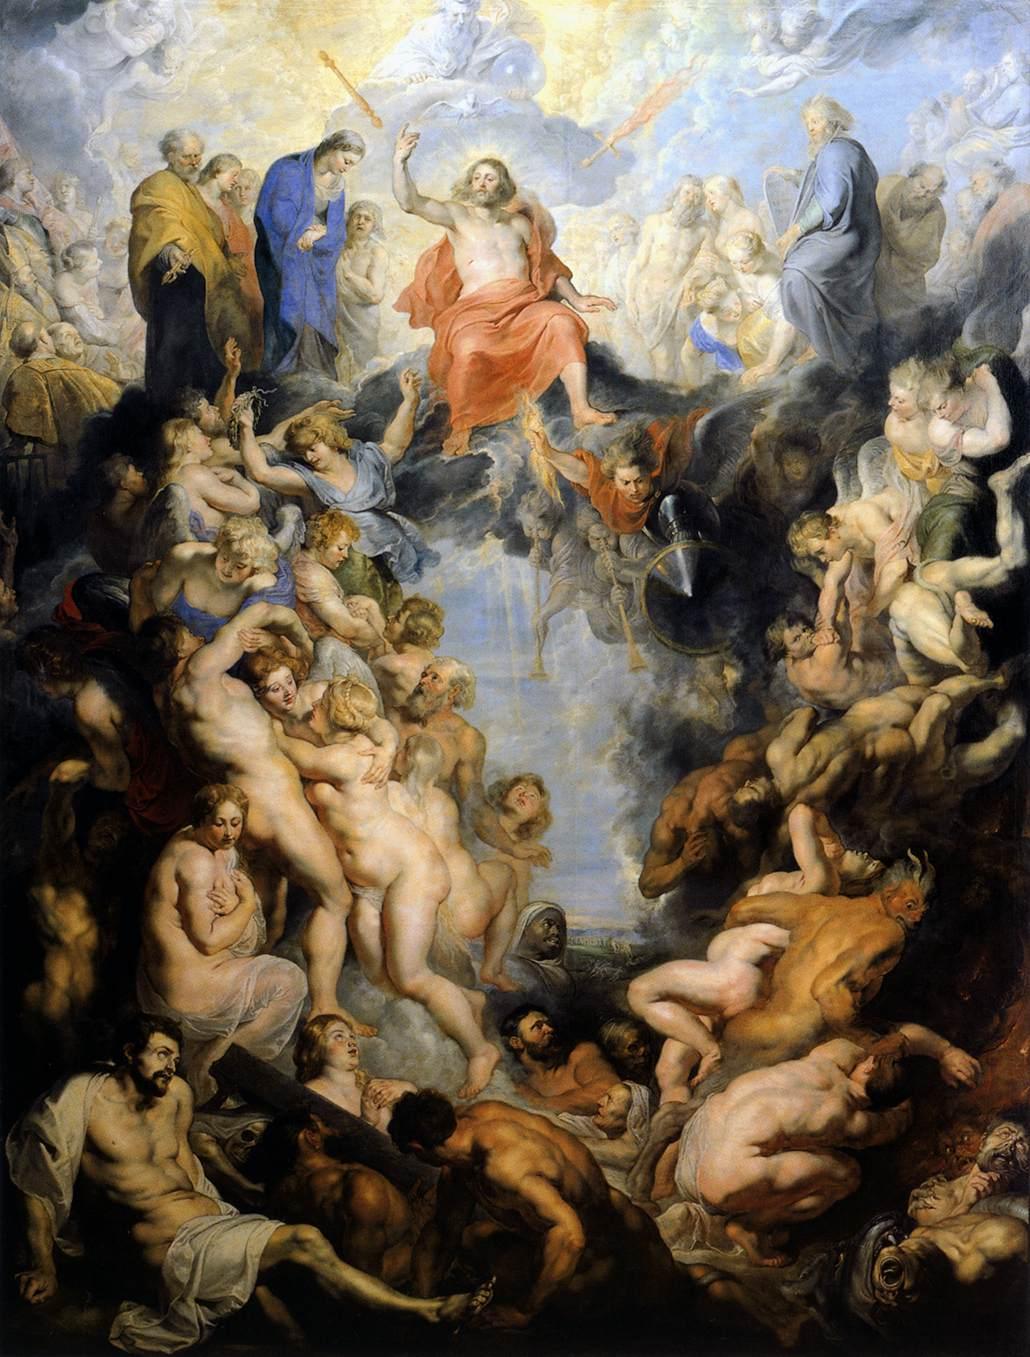 The Great Last Judgement, by Peter Paul Rubens, 1614-1617. Oil on canvas.  Alte Pinakothek, Munich. Melodramatic and sensuous Baroque.